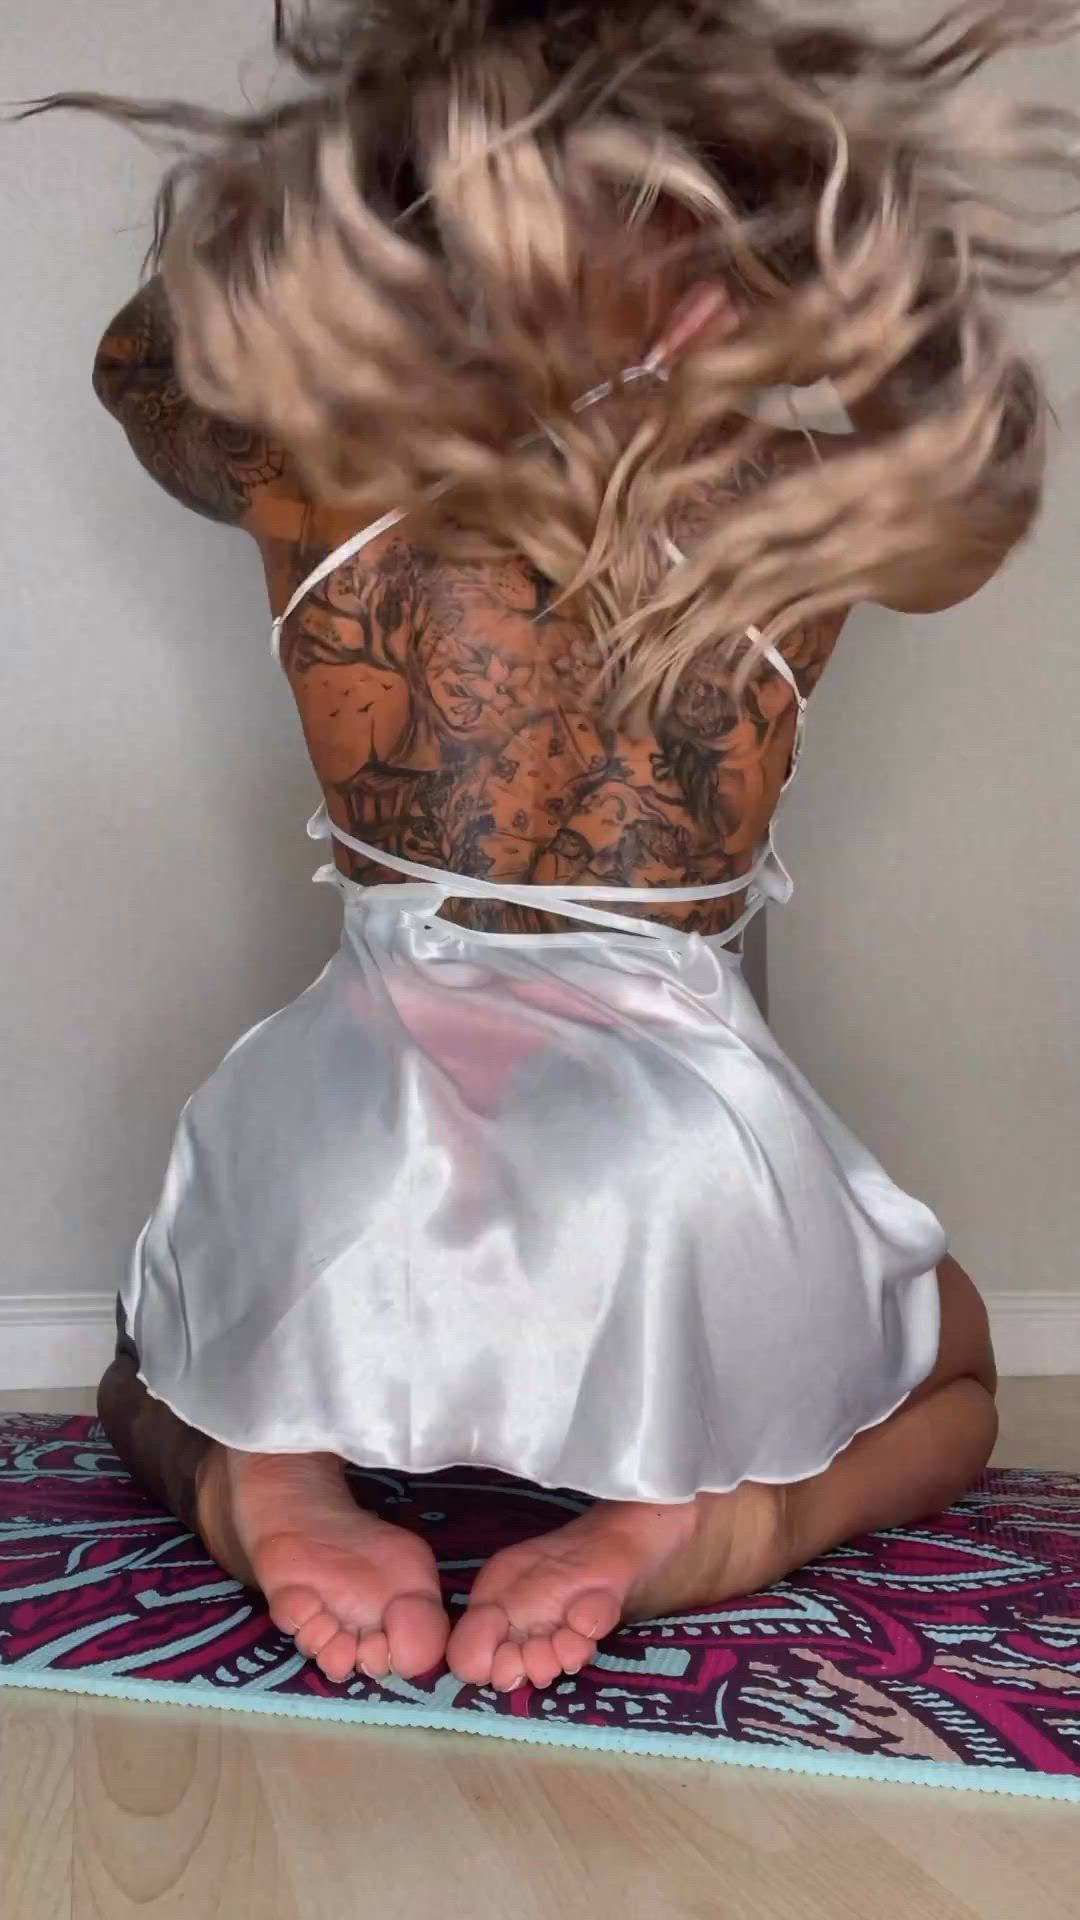 Ass porn video with onlyfans model pennypink78 <strong>@pennypink14</strong>